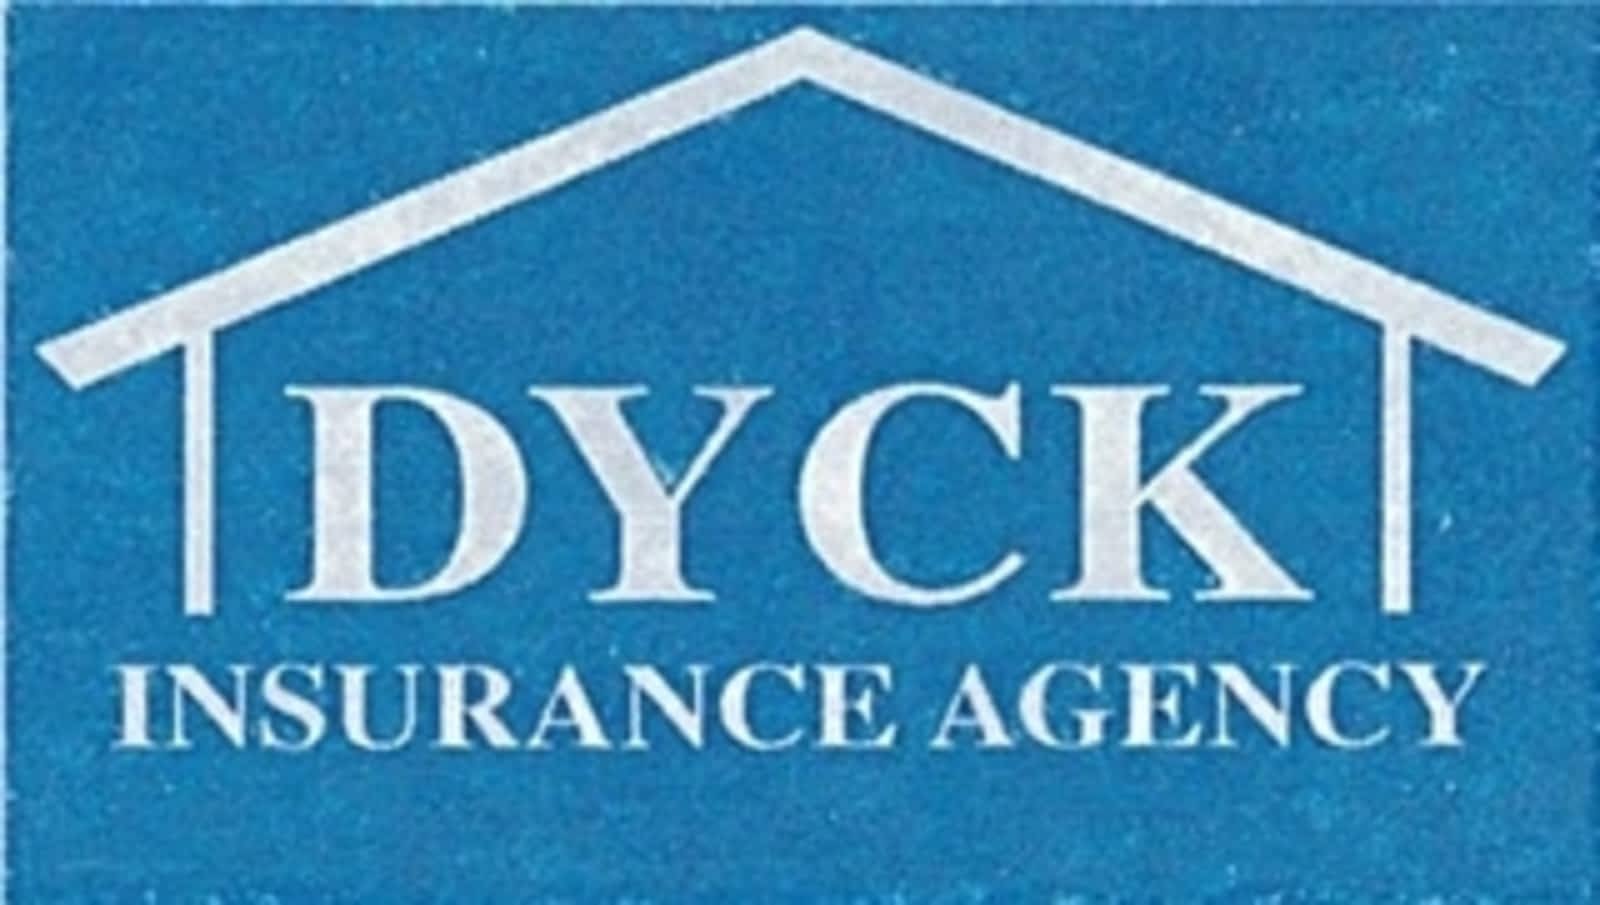 life insurance quote engine for agents dyck insurance agency wetaskiwin ltd opening hours 5105 47